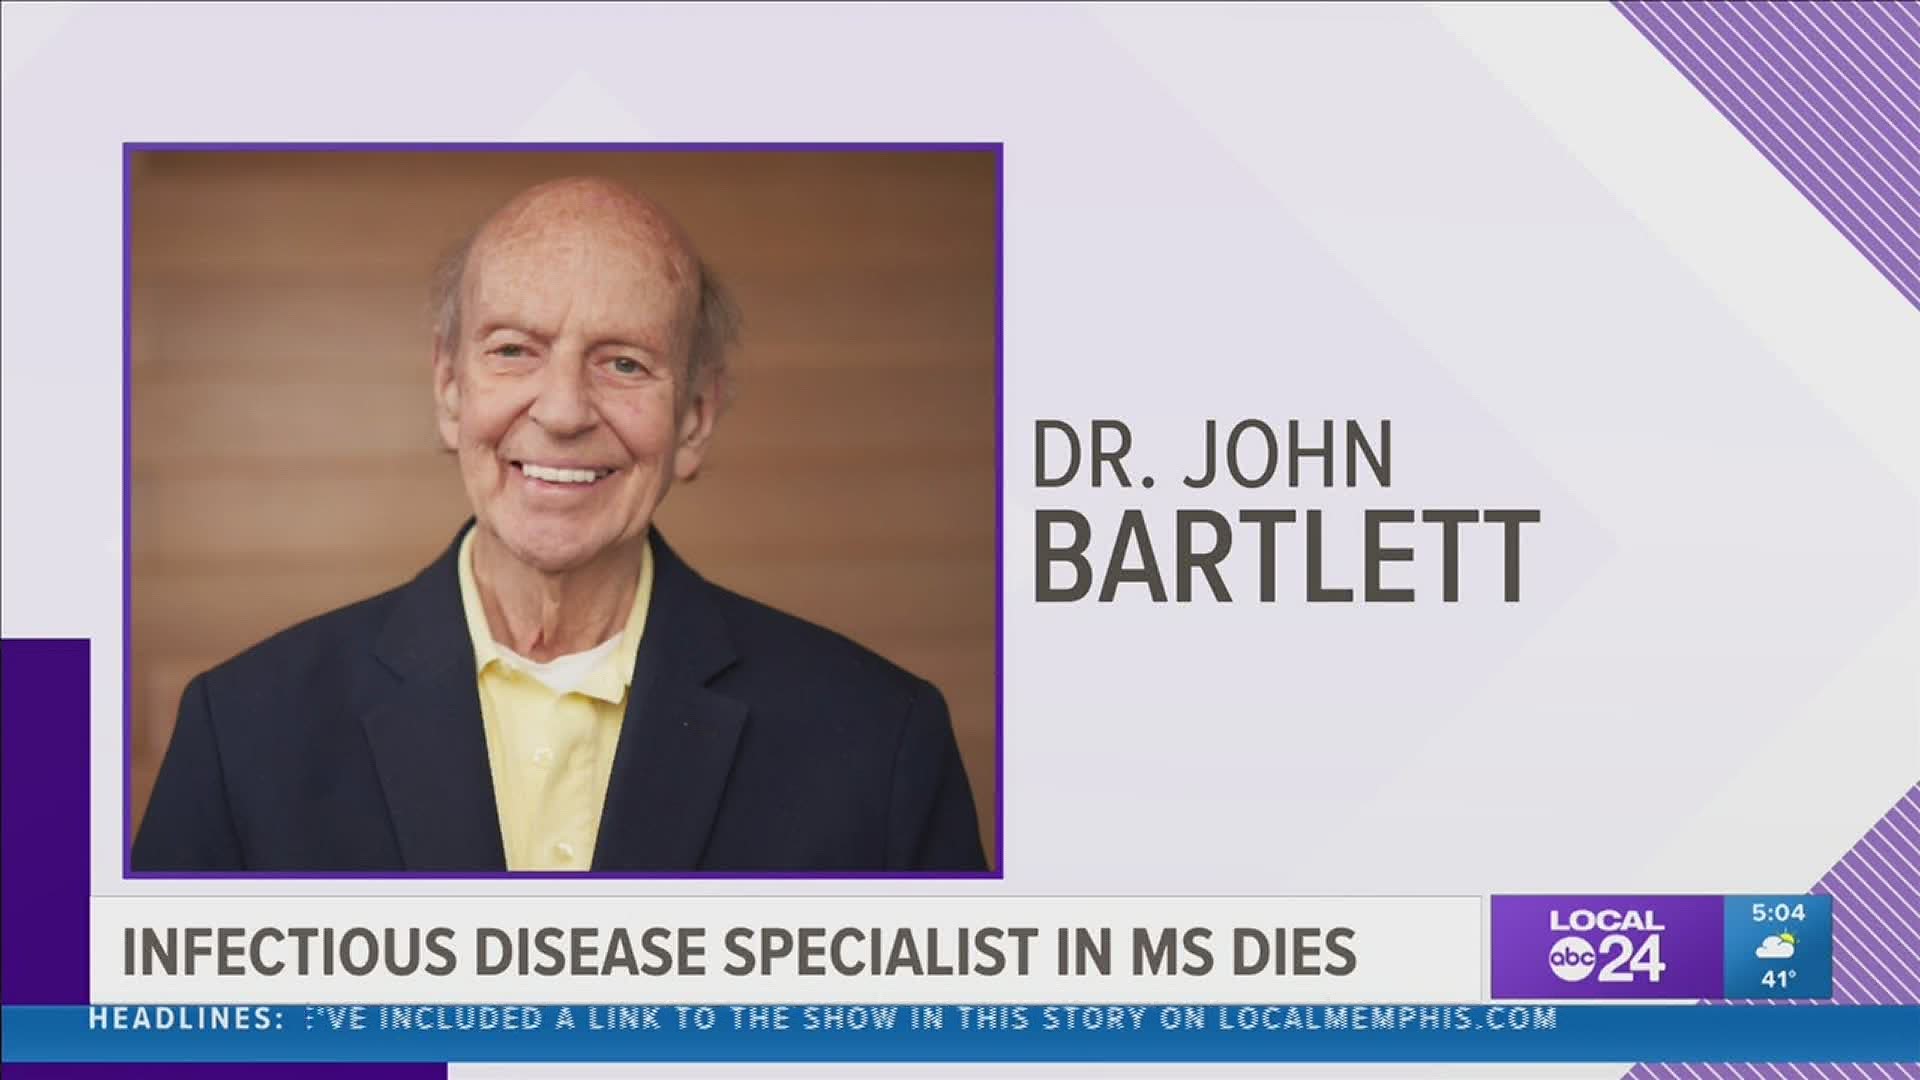 A widely respected infectious disease specialist who played a role in the growth of the nationally renowned Johns Hopkins Hospital has died at age 83.